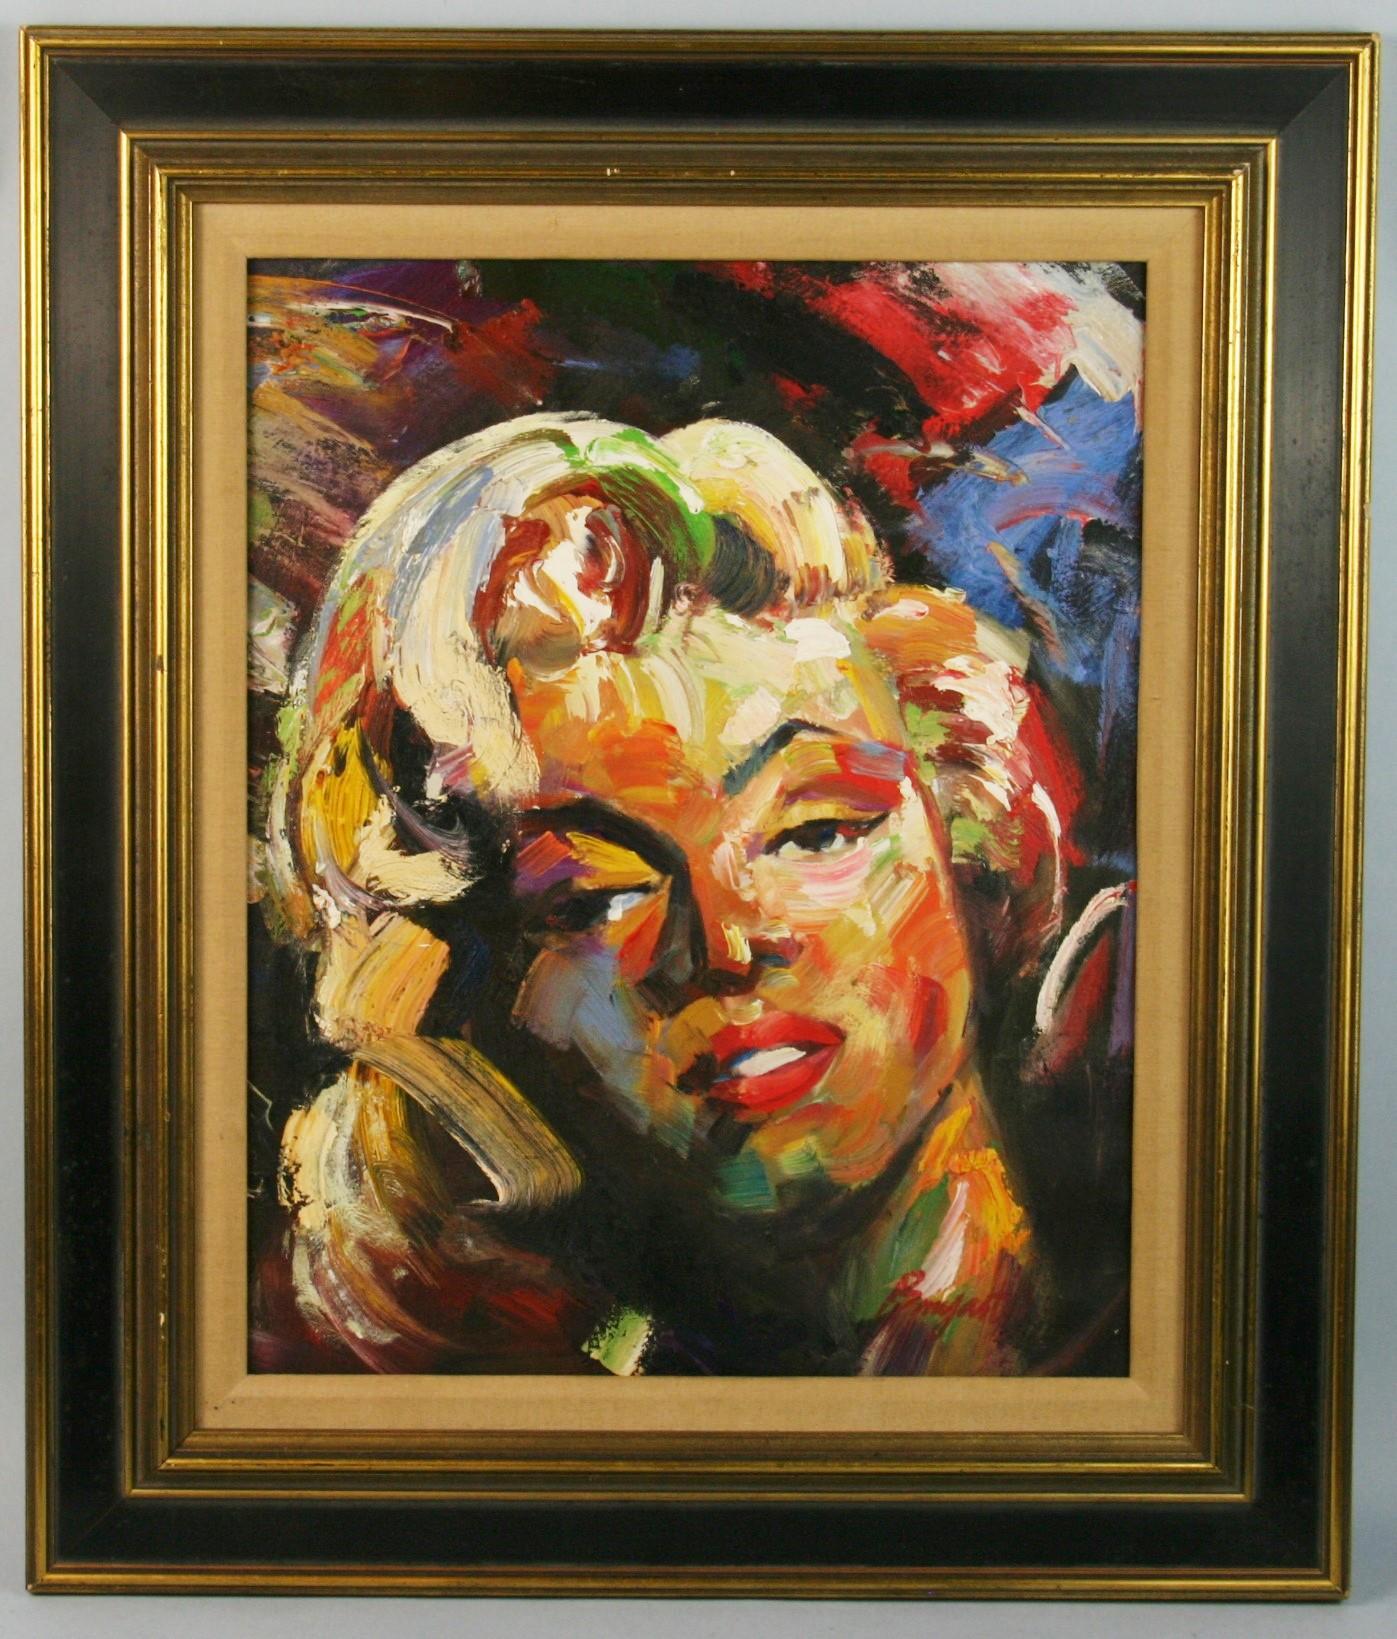 3900 Oil on board set in a custom wood frame
Image size 19.5x 15.5"